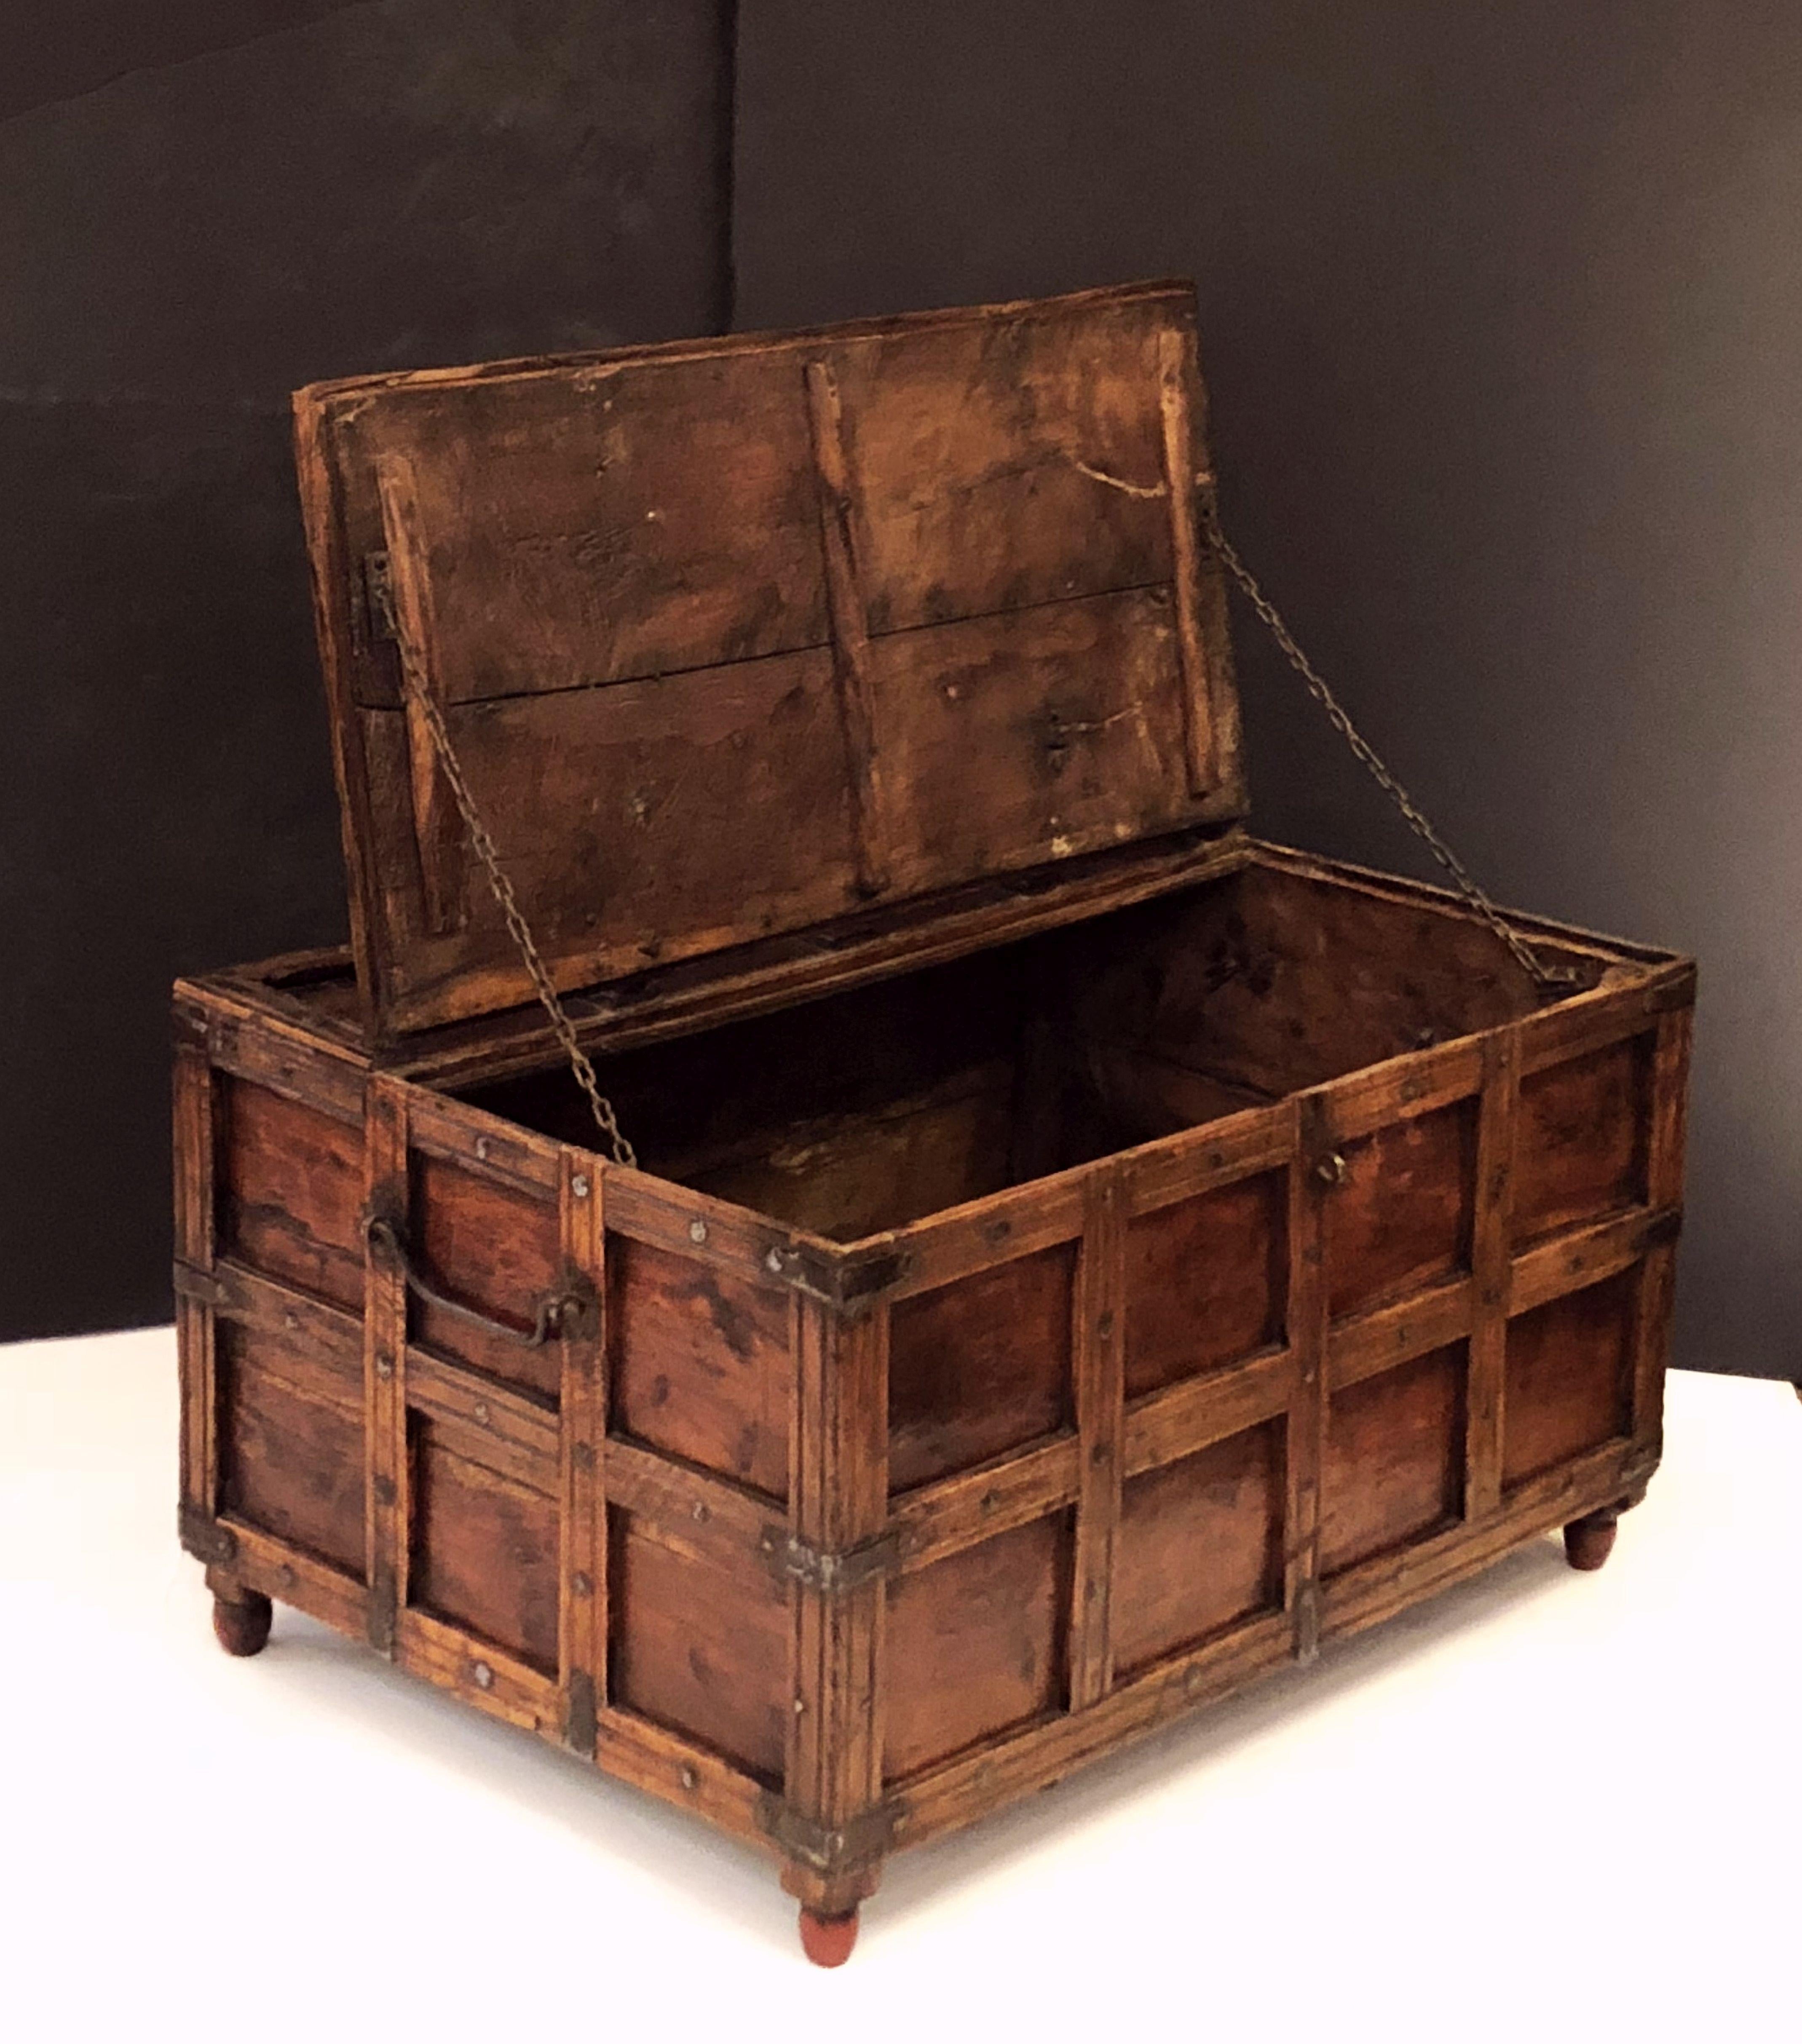 Iron-Bound Stick Box or Trunk from British Colonial India 'The Raj' 3